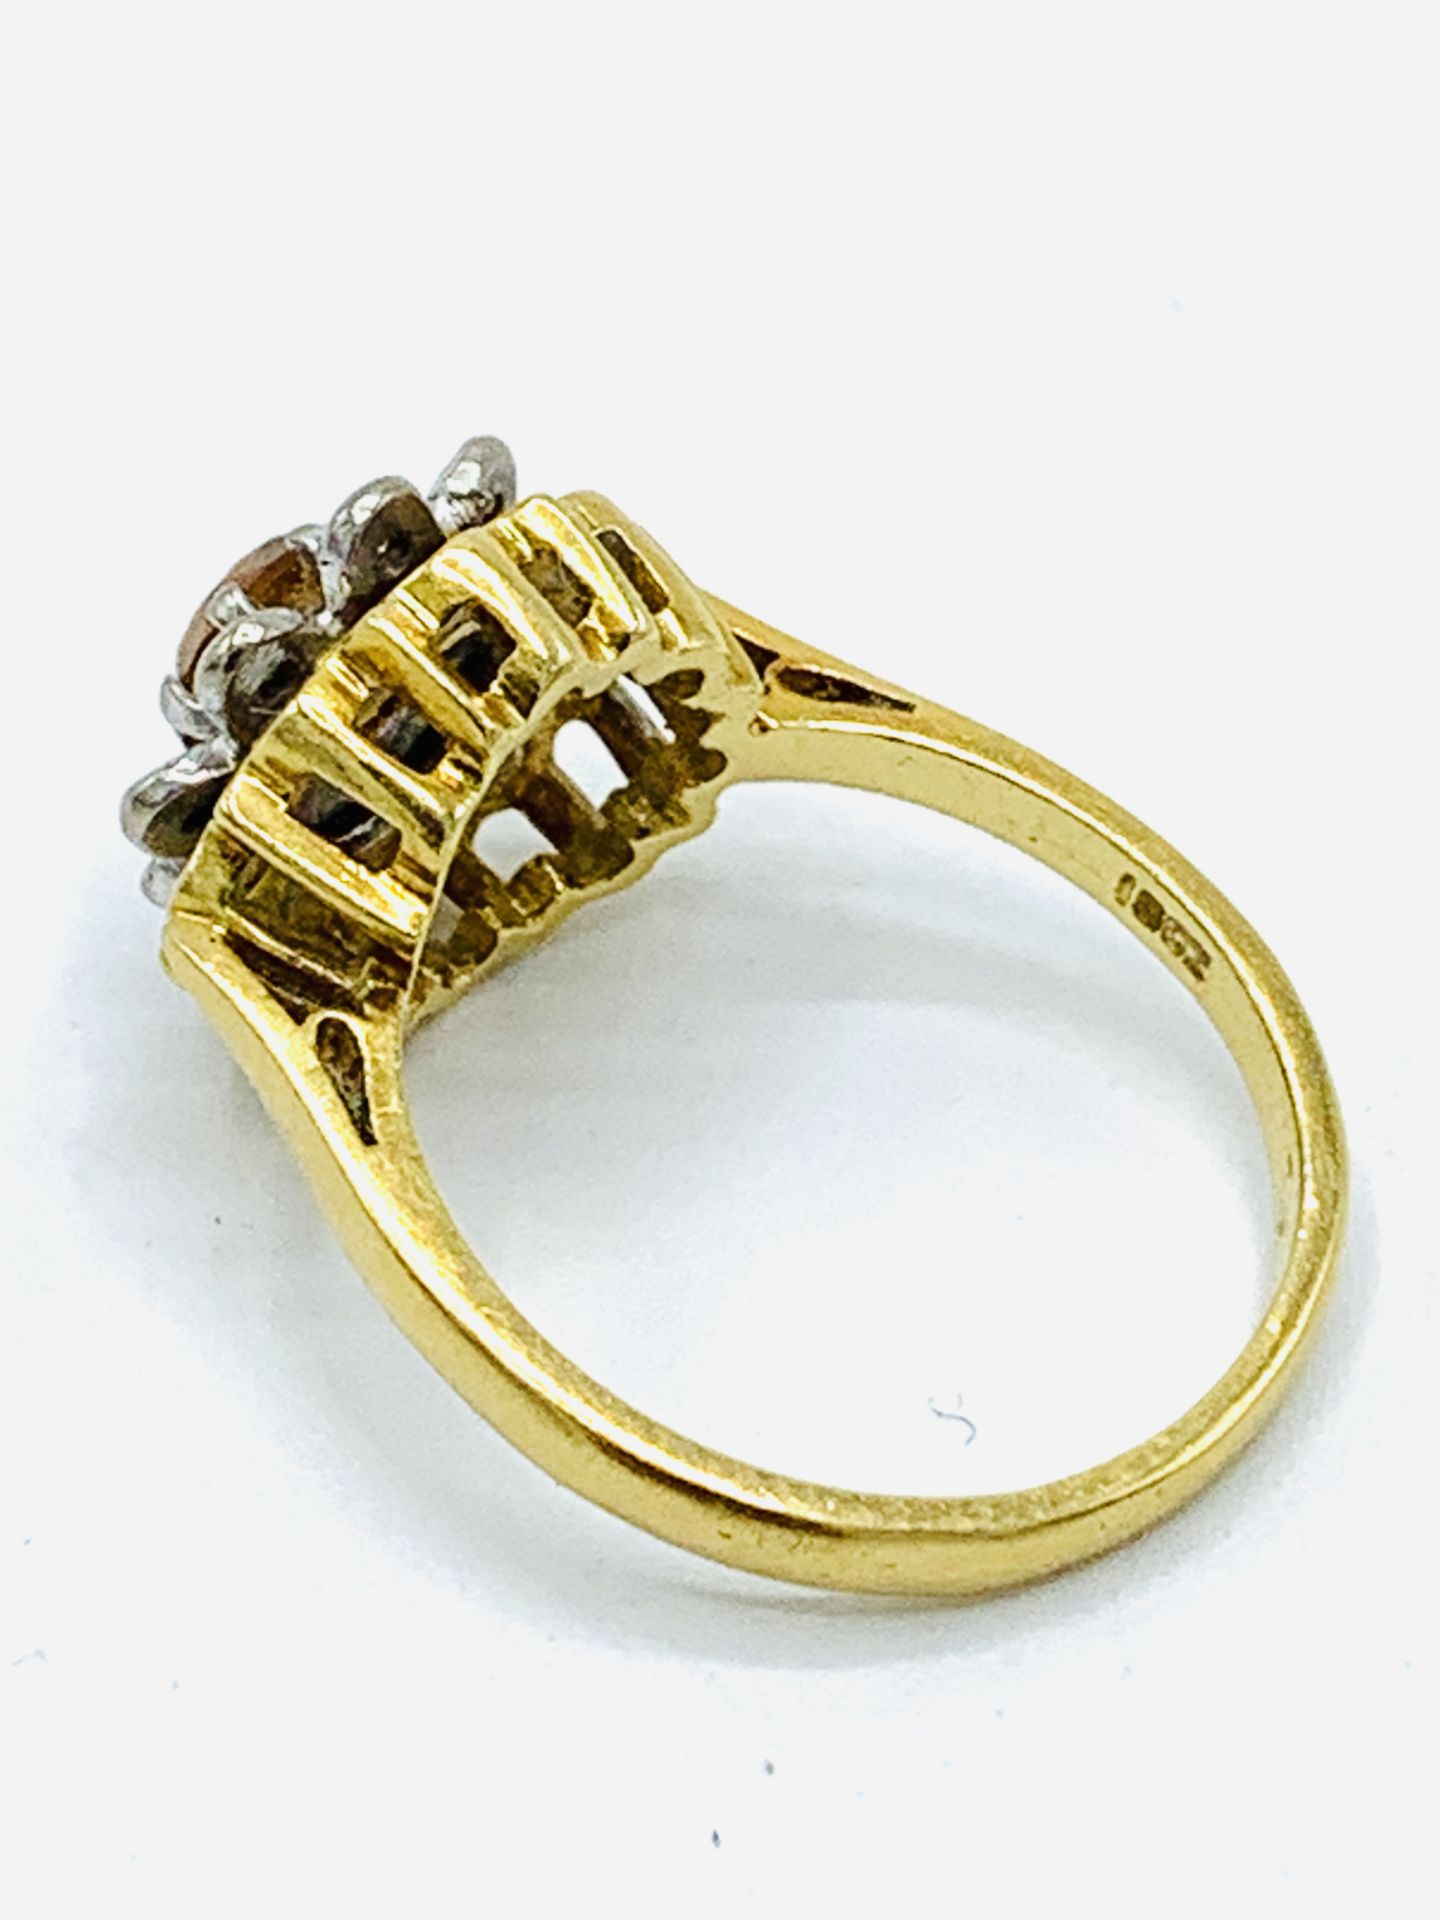 18ct gold citrine and diamond cluster ring - Image 2 of 4